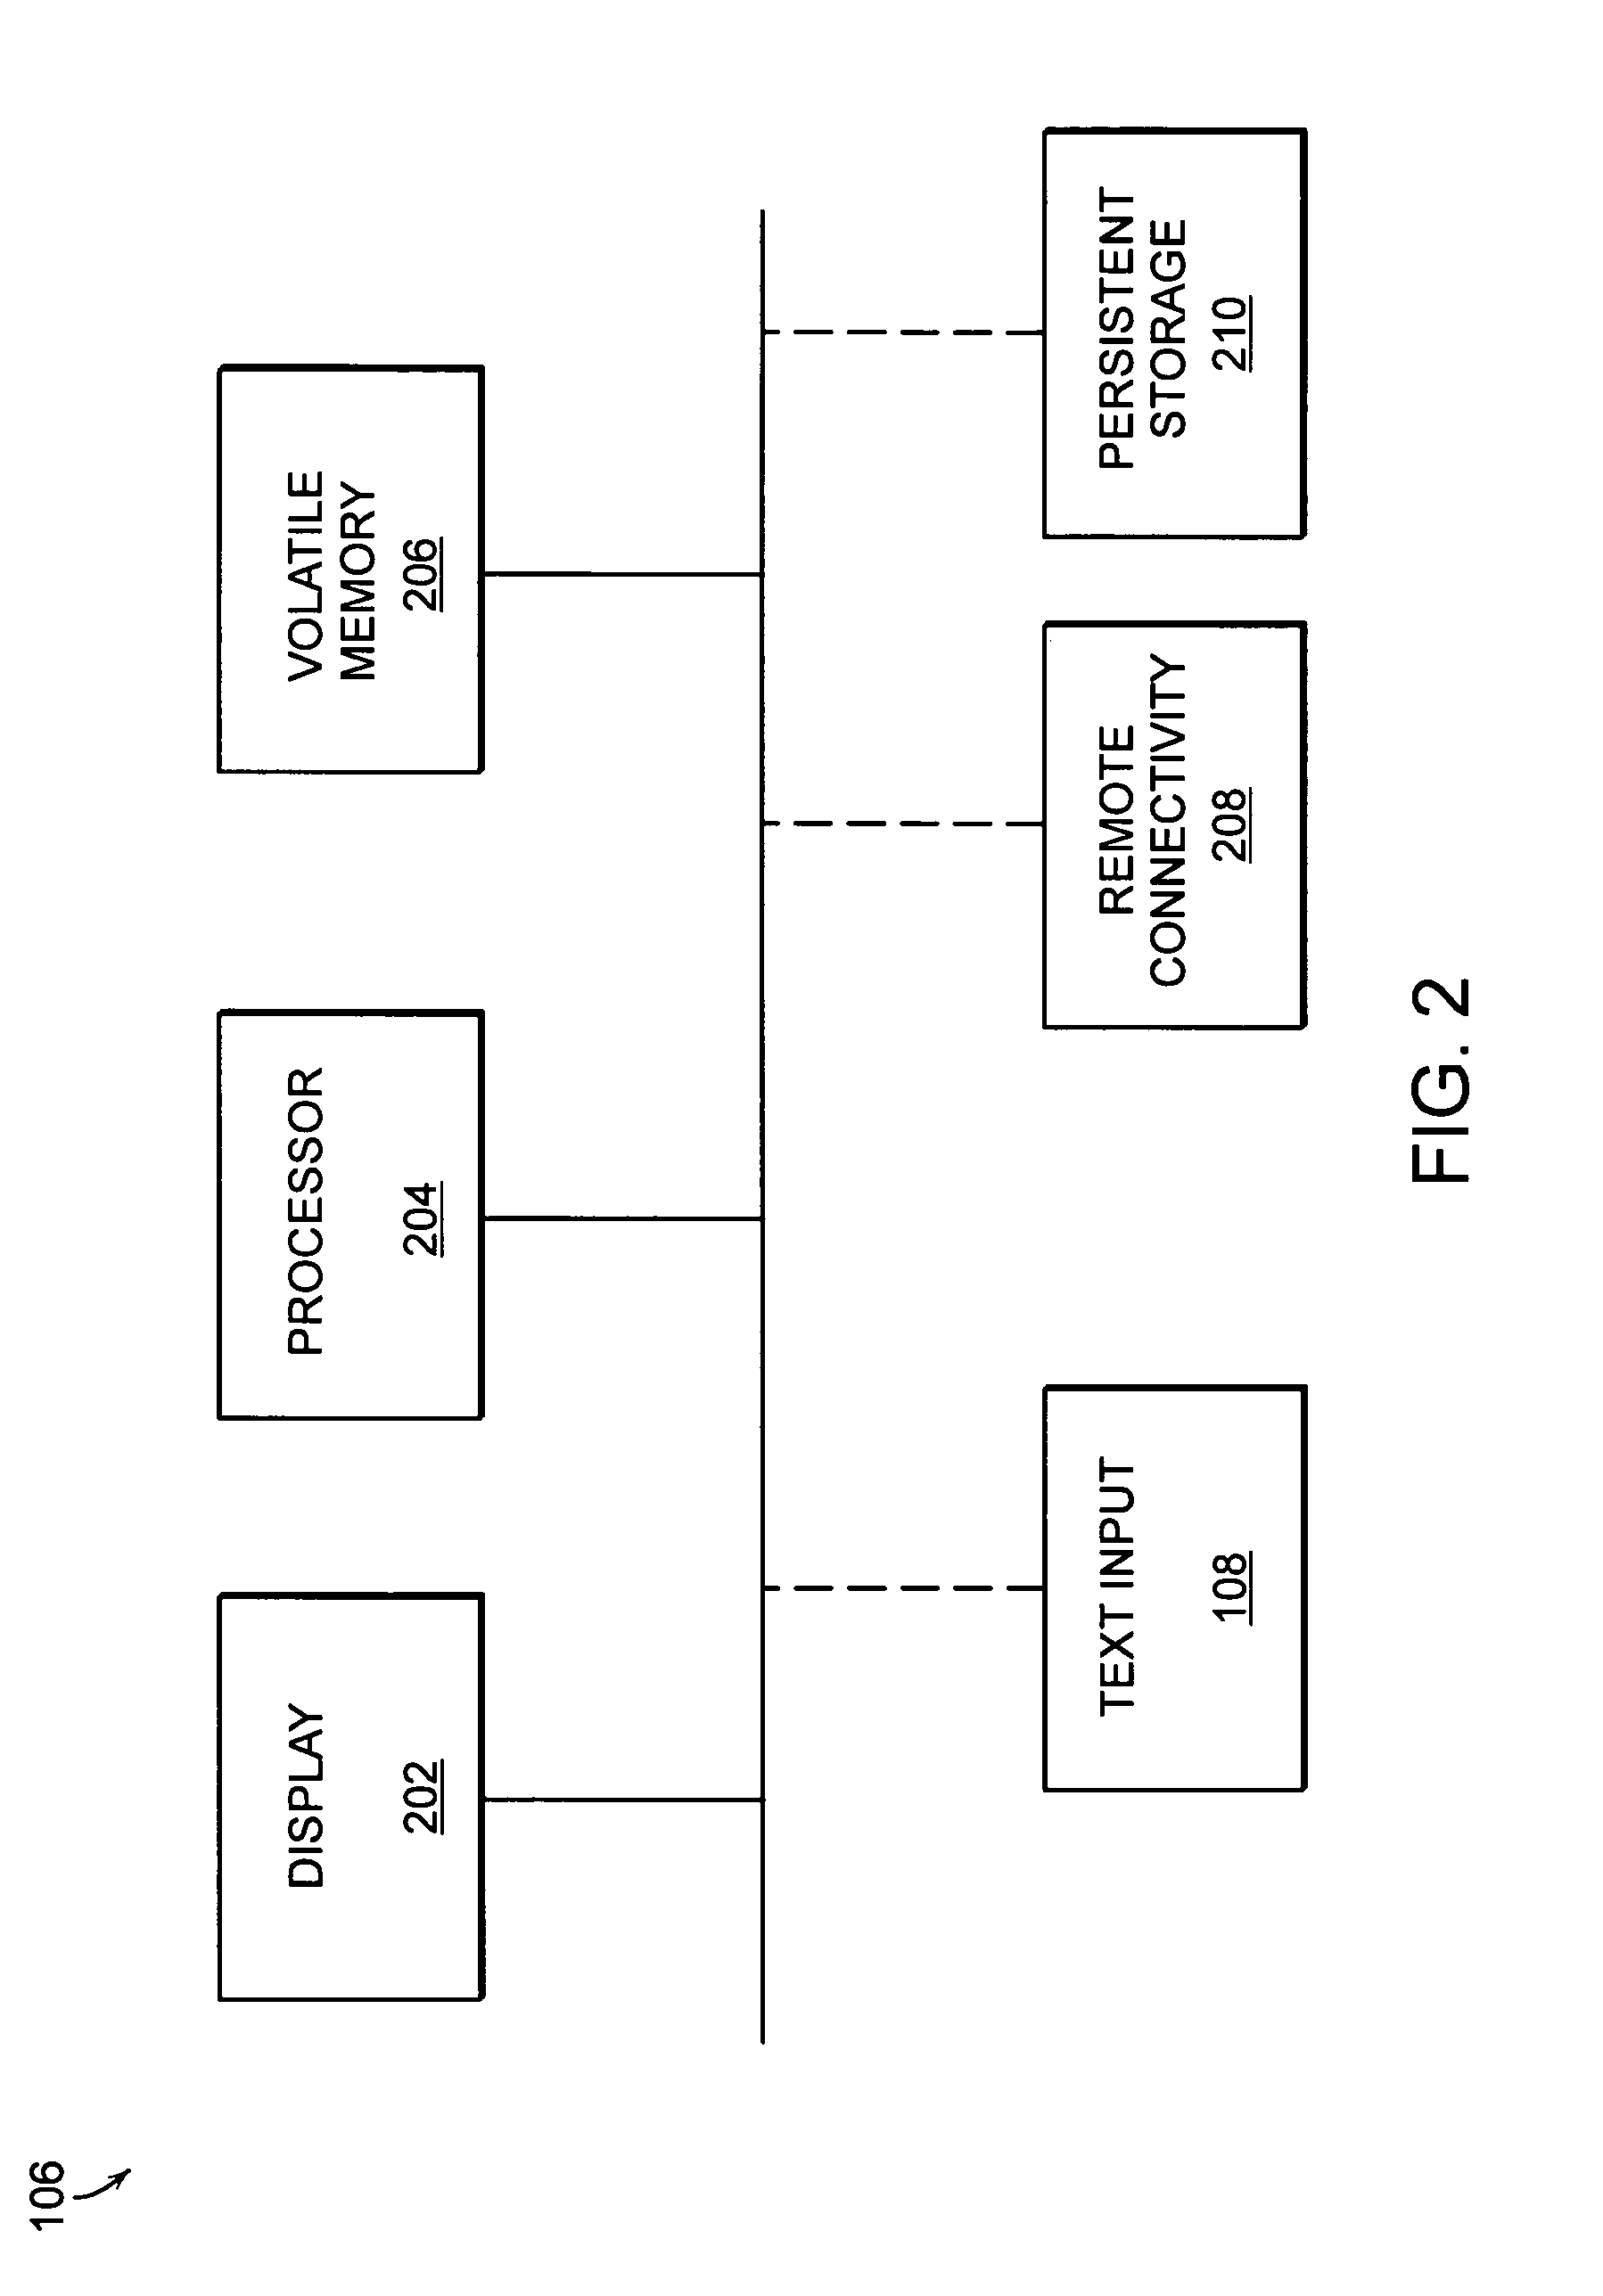 Method and system for performing searches for television content and channels using a non-intrusive television interface and with reduced text input